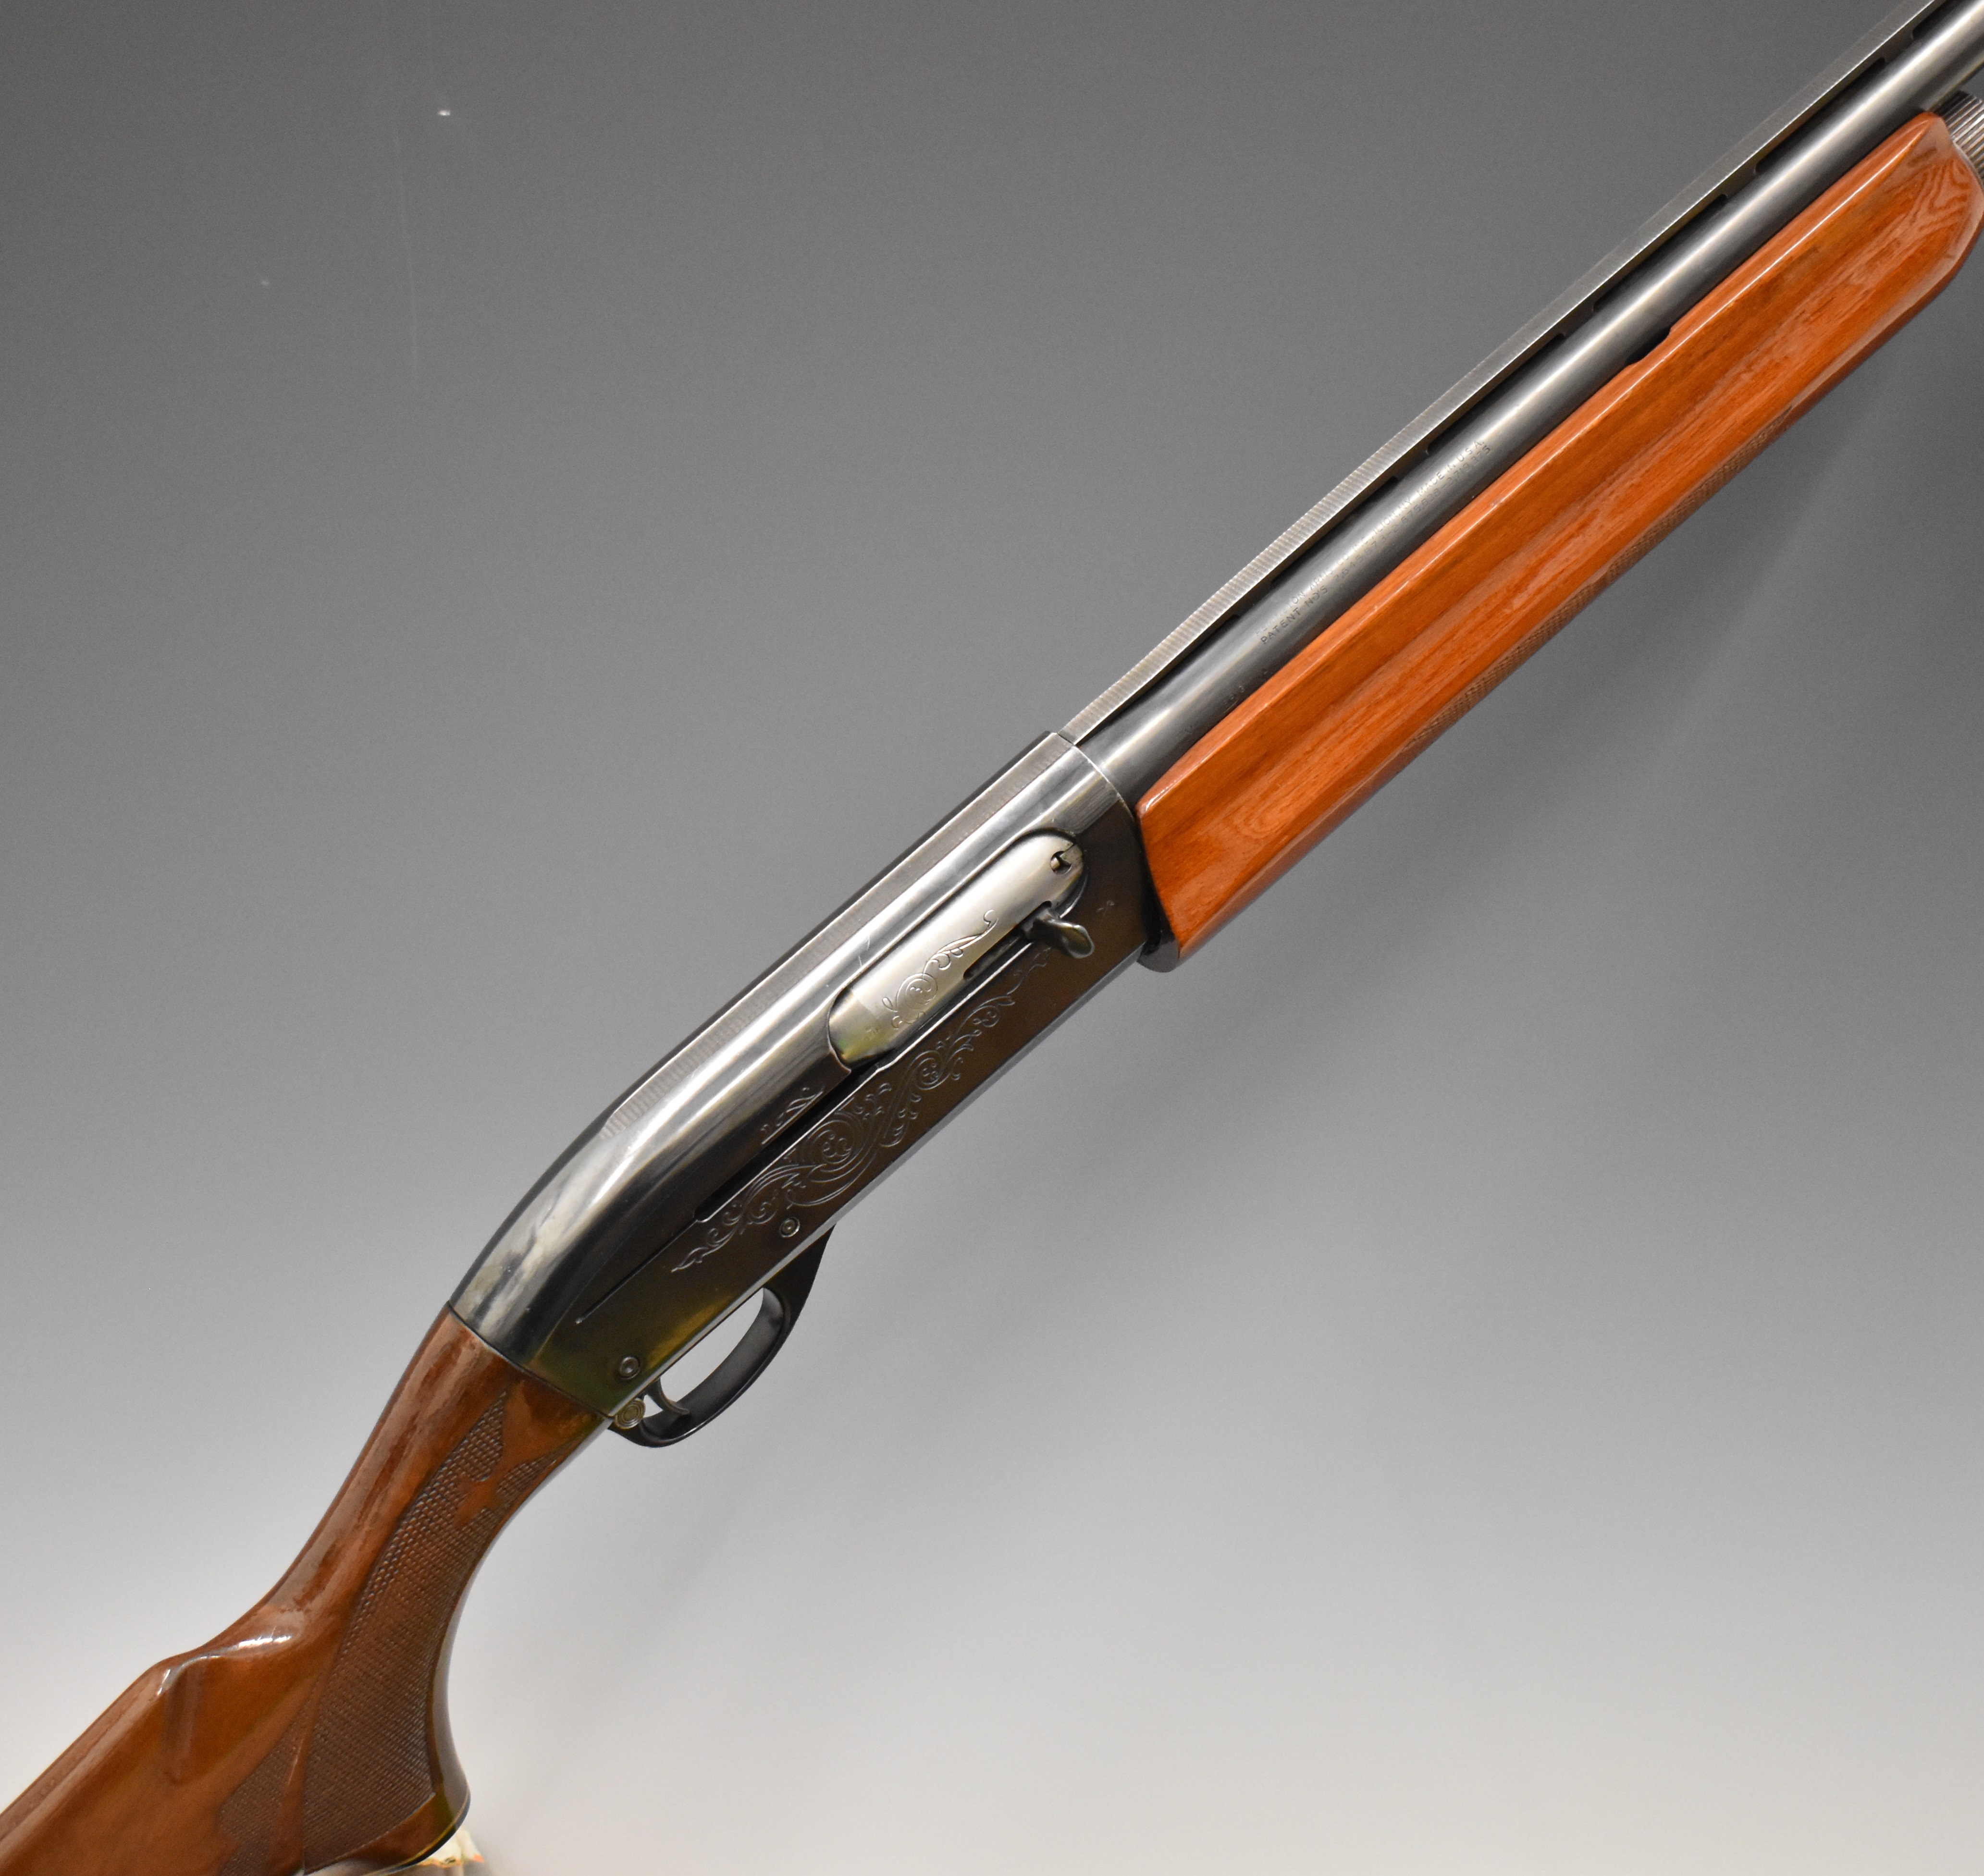 Remington Model 1100 12 bore 3-shot semi-automatic shotgun with ornately carved and chequered semi-